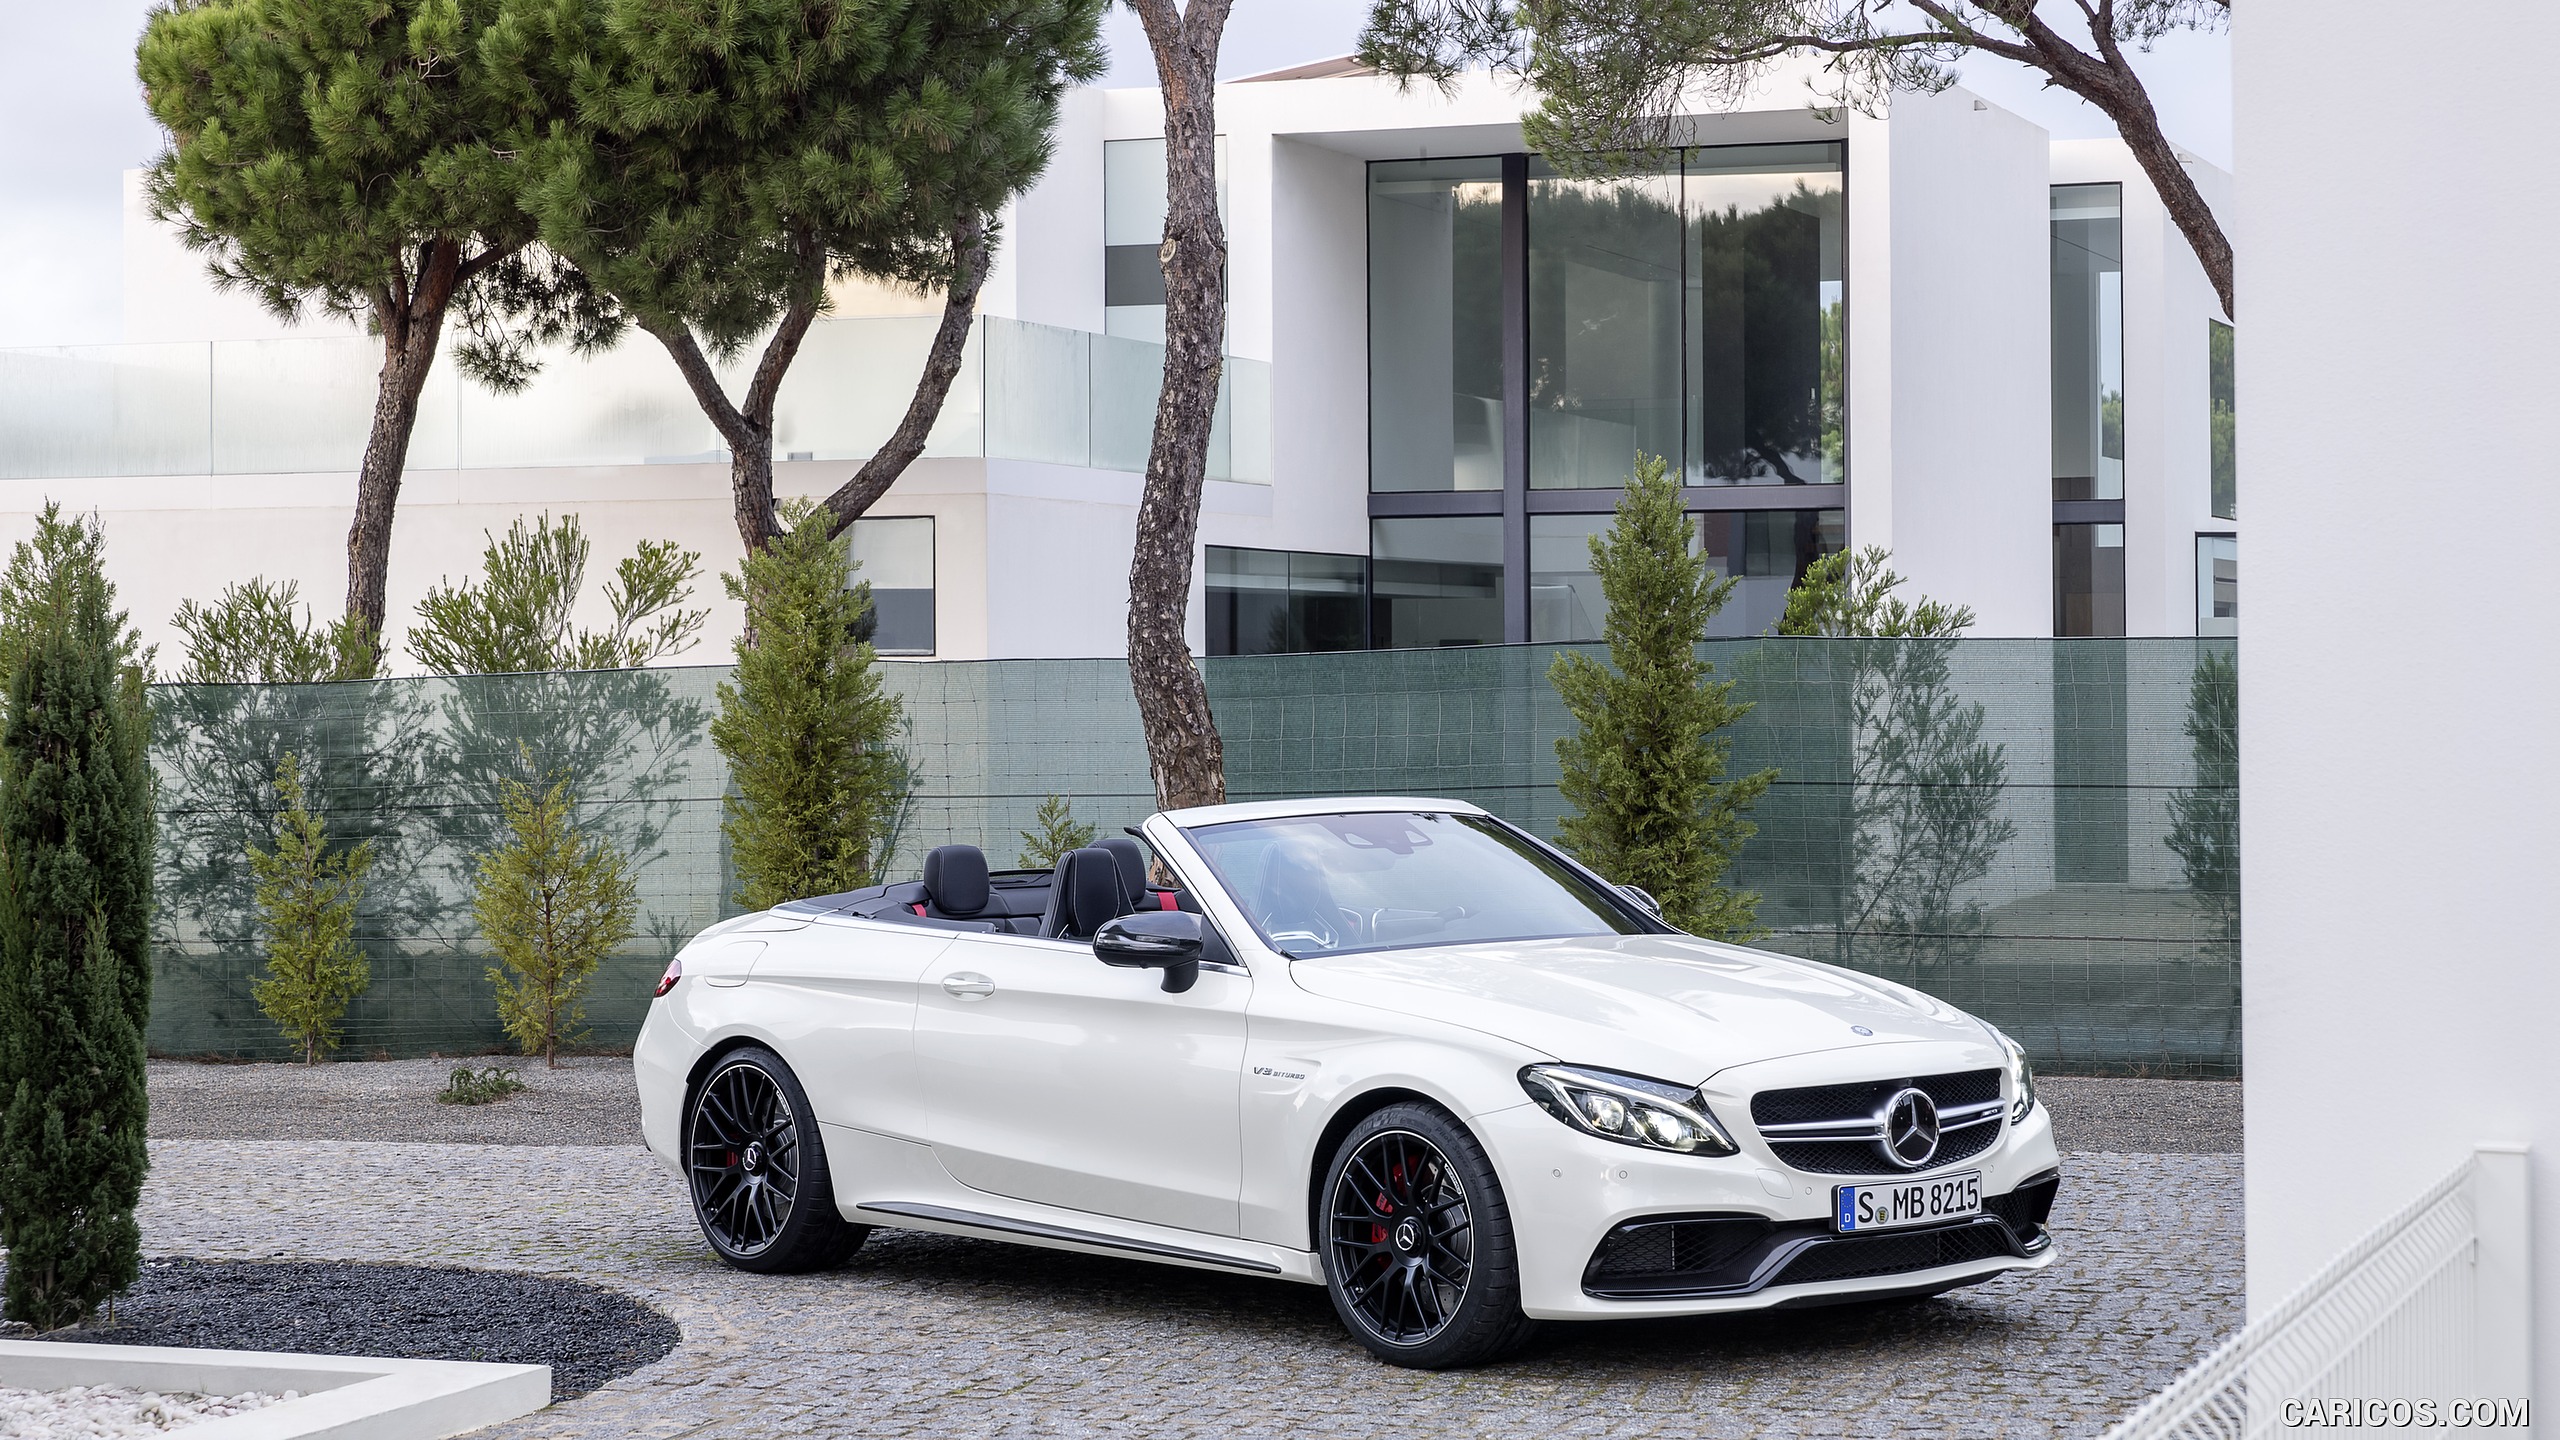 2017 Mercedes-AMG C63 S Cabriolet (Chassis: A205, Color: Designo Diamond White Bright) - Front, #14 of 222